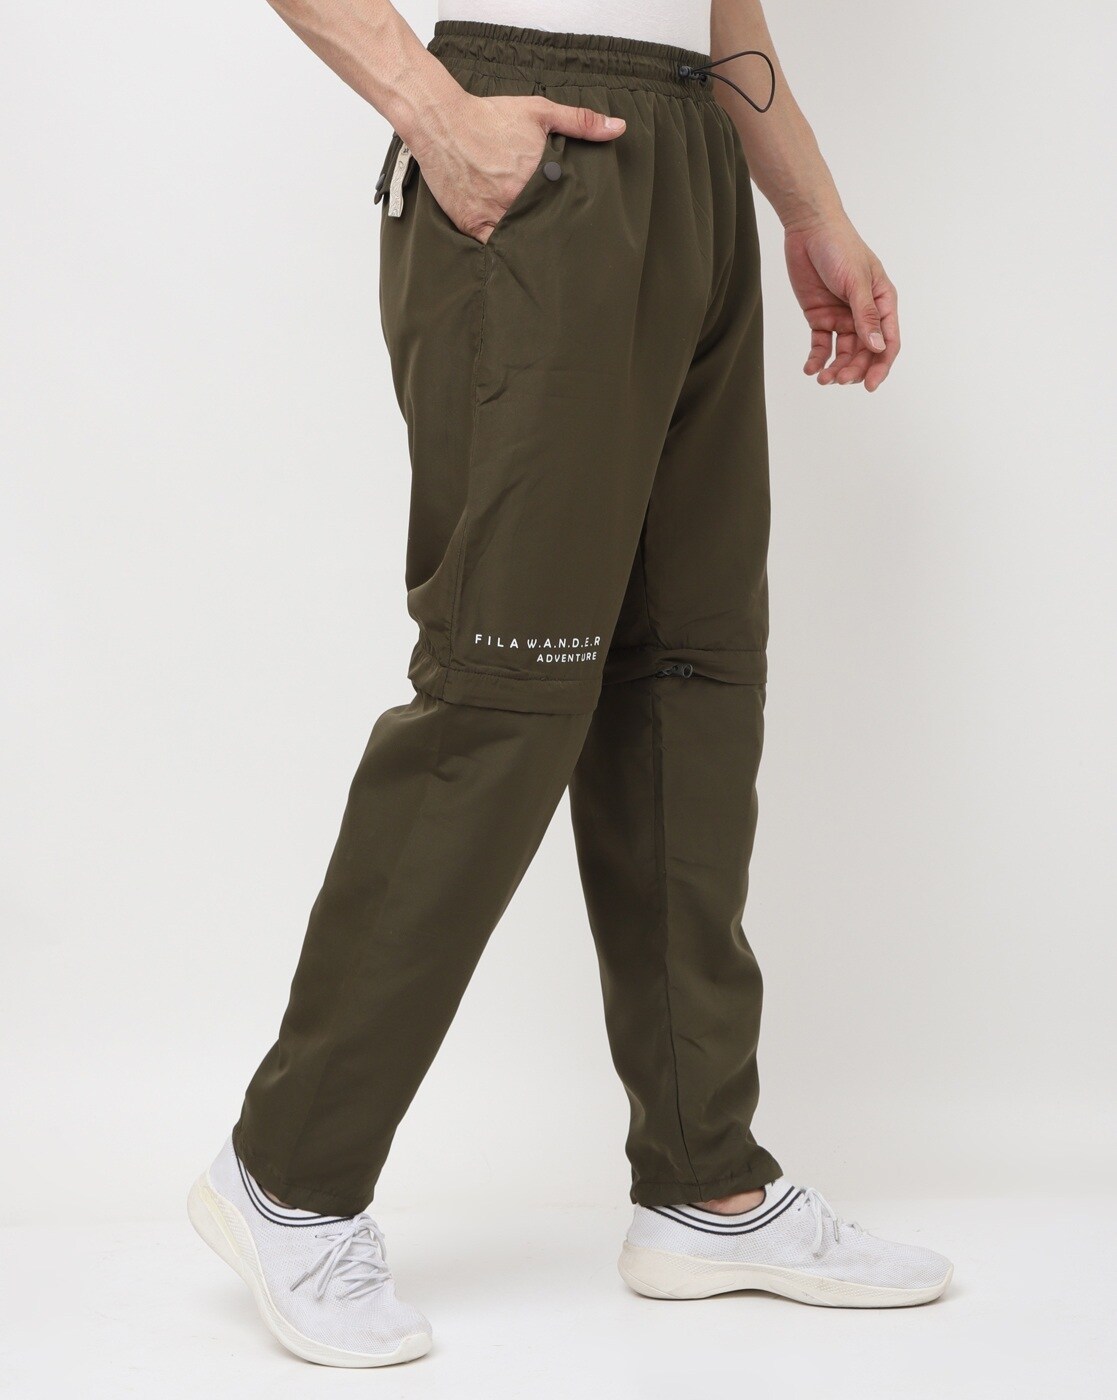 Buy Fila women classic fit cargo pants green olive Online | Brands For Less